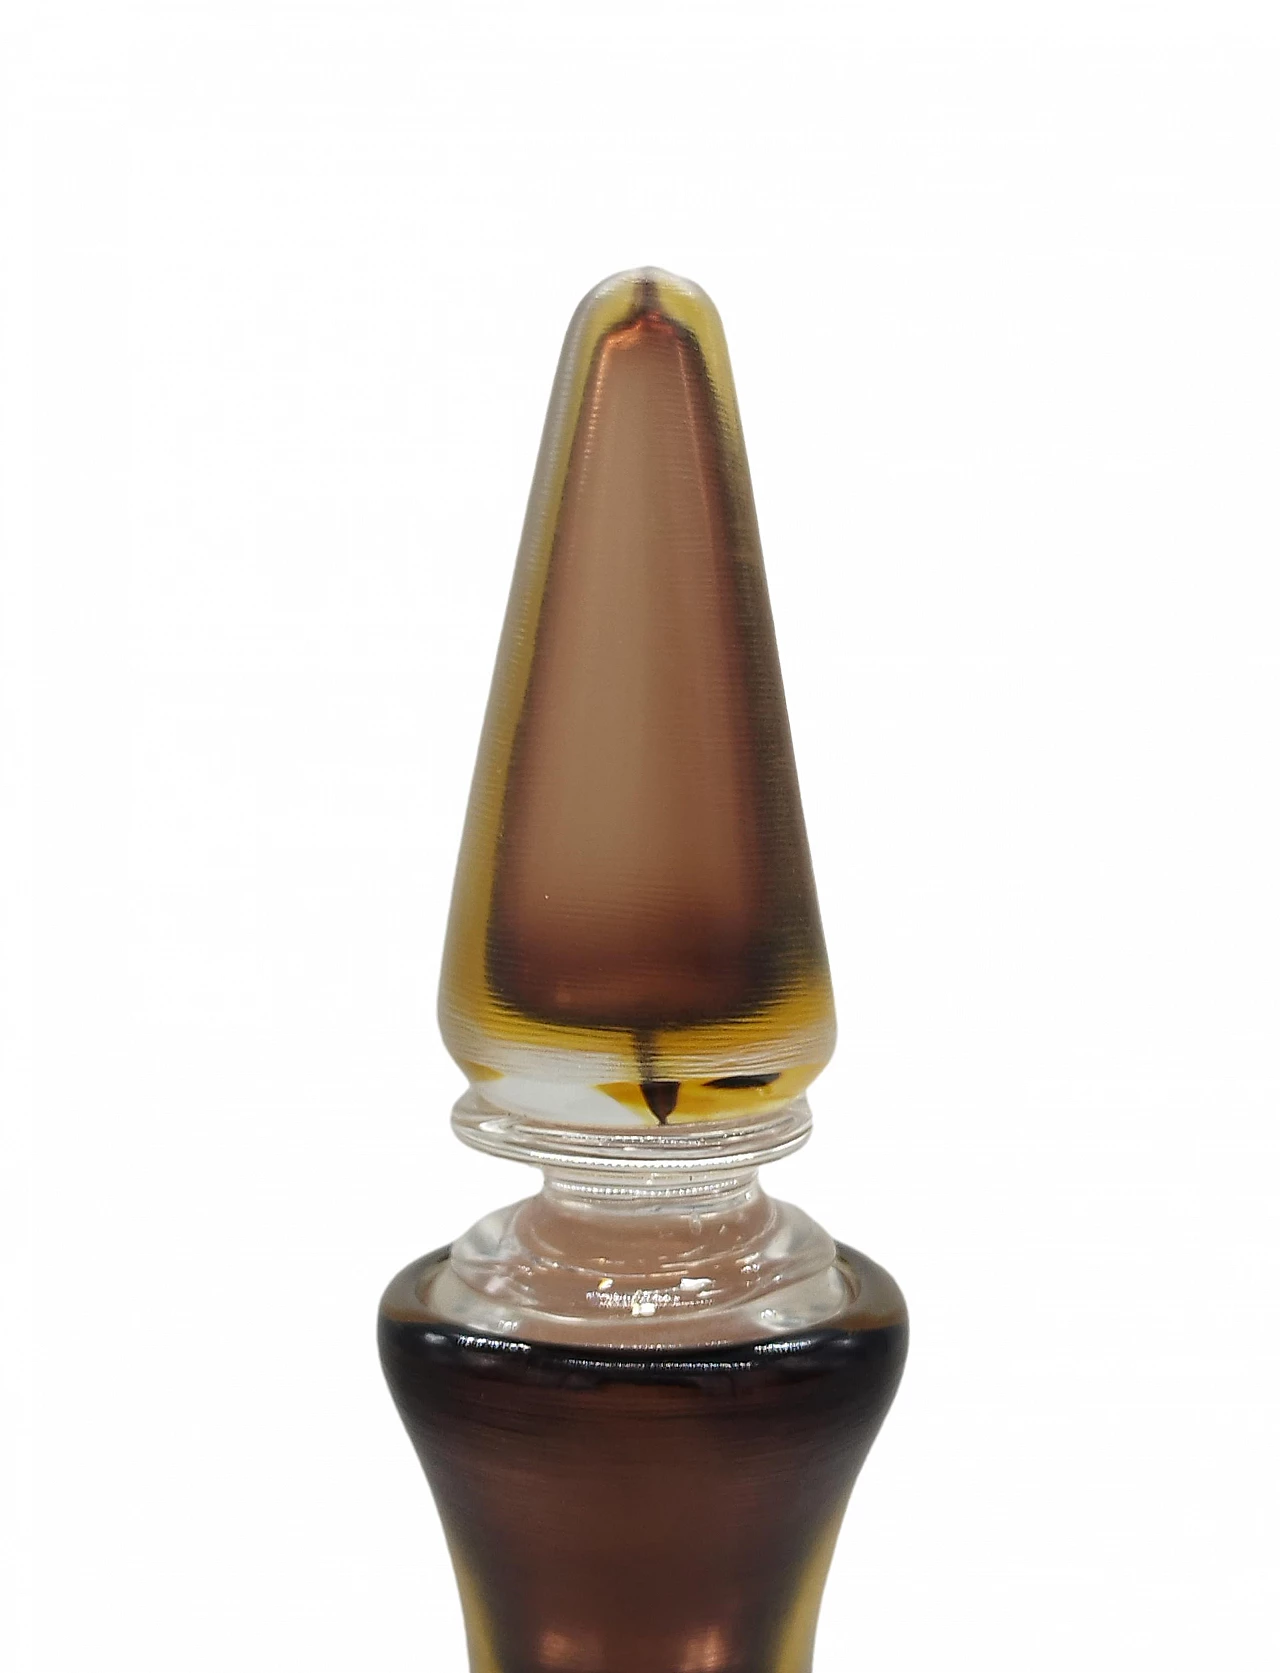 Murano glass bottle with stopper from the Bottiglie Incise series by Paolo Venini, 1985 6